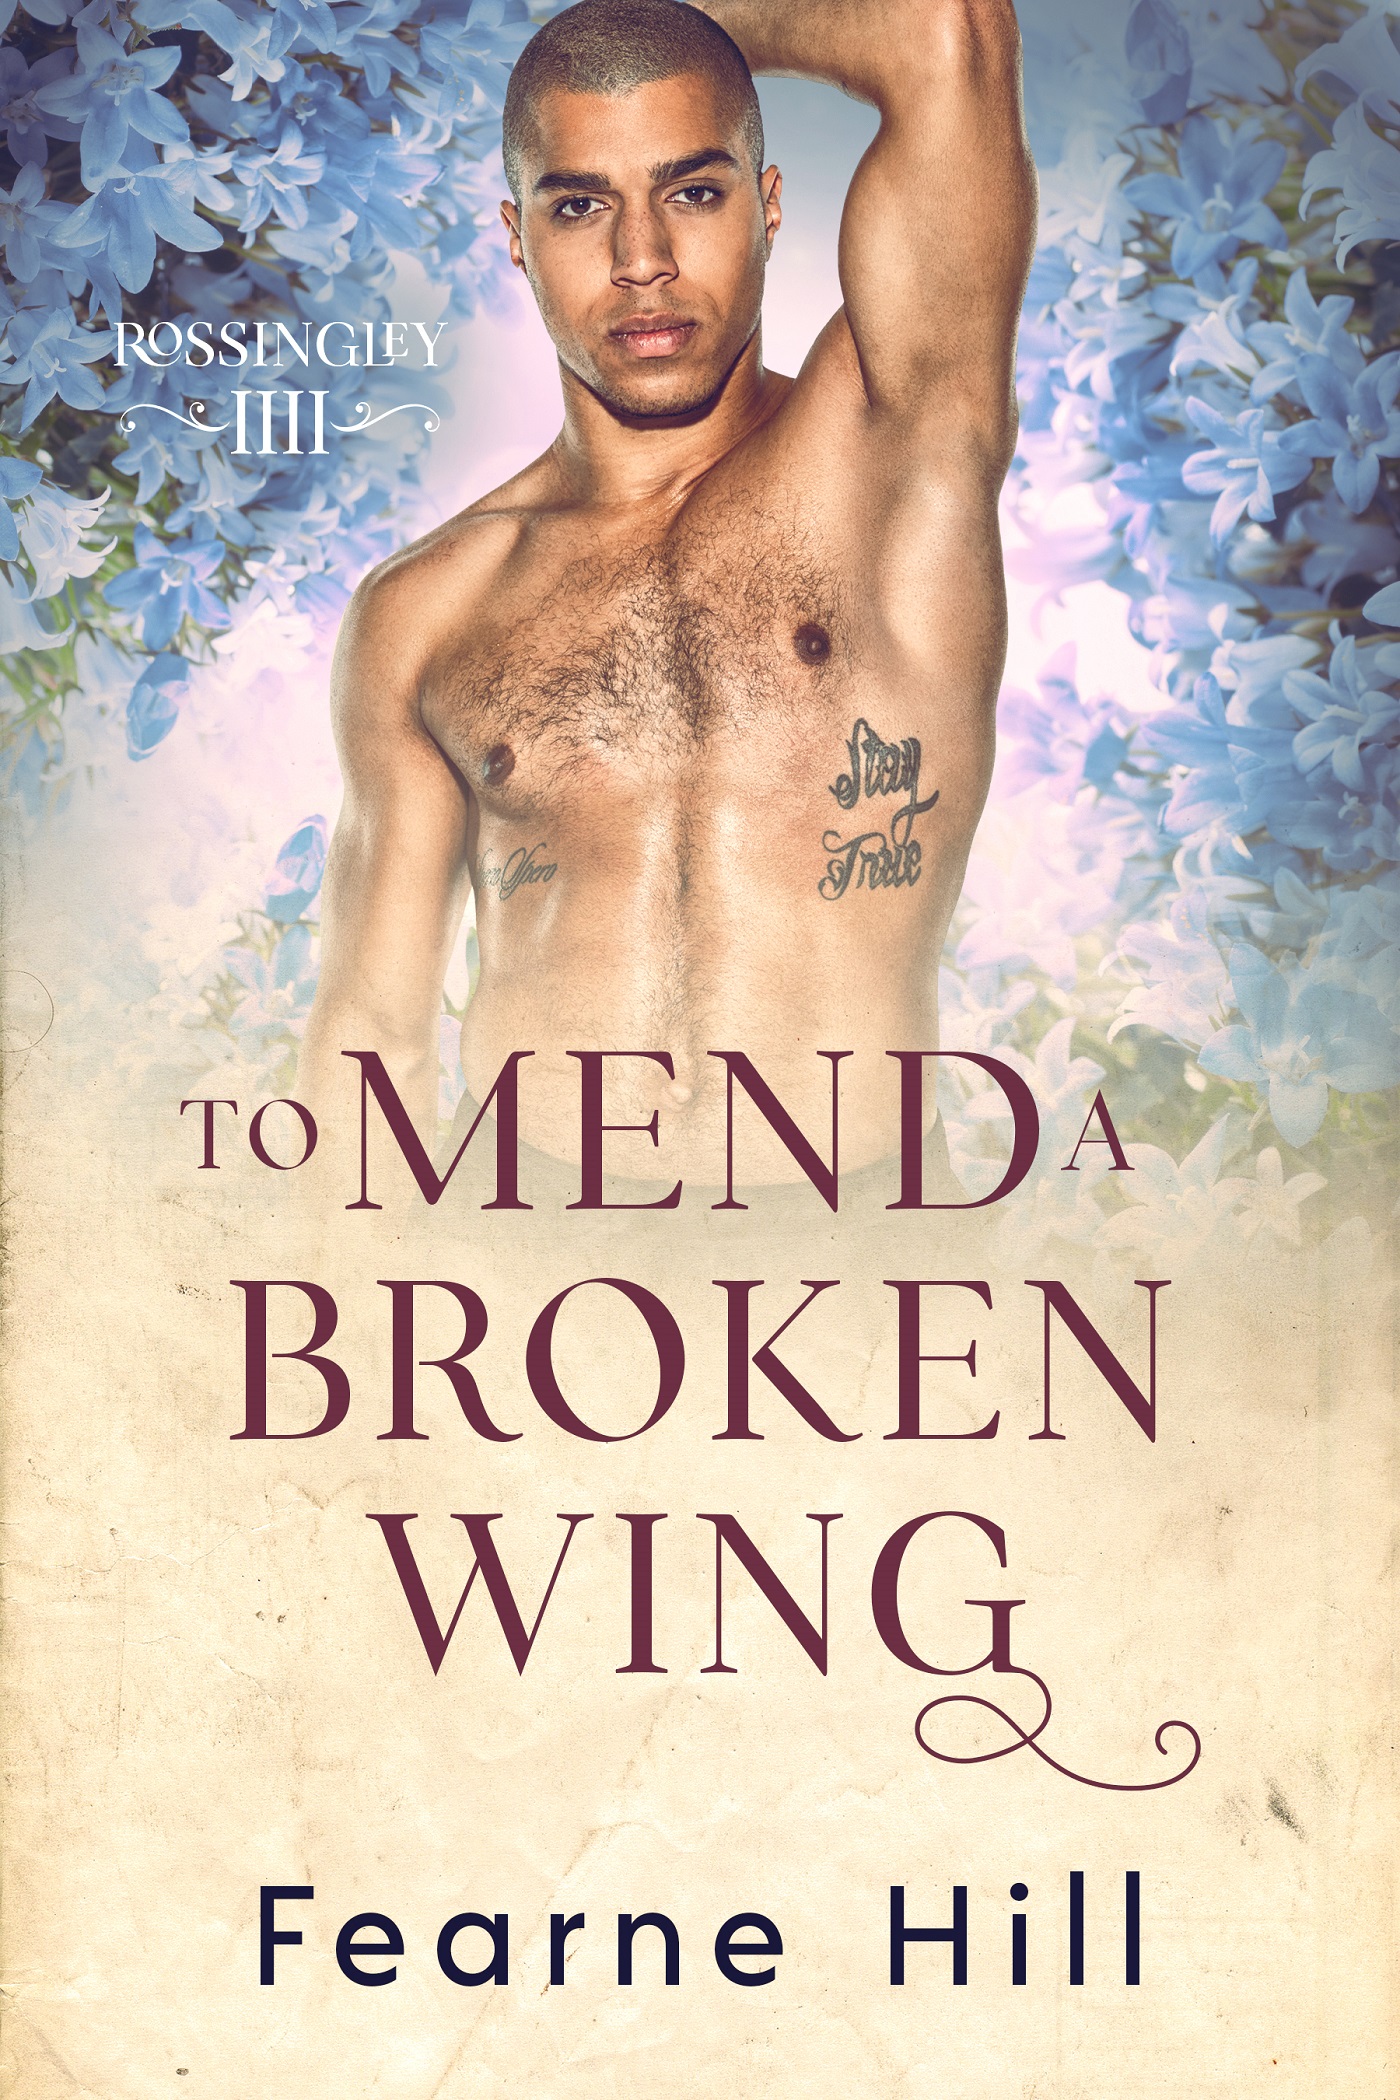 To Mend a Broken Wing by Fearne Hill PDF Download